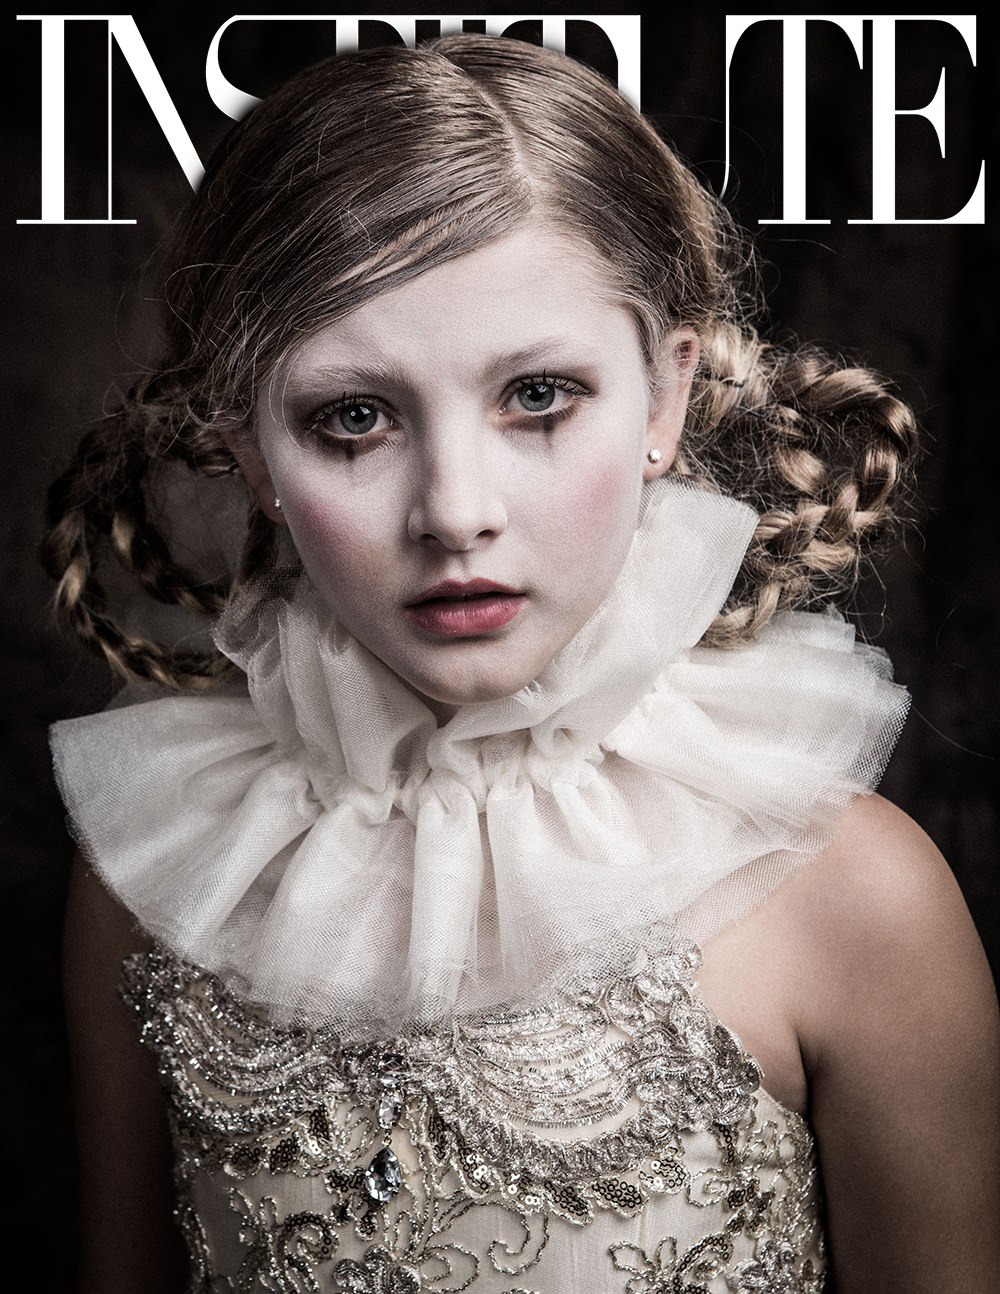 Ryan Baumann on the COVER of INSTITUTE MAGAZINE: Top model Ryan Baumann wearing couture designer Alexandria Olivia for the cover of INSTITUTE MAGAZINE, August 30, 2015.